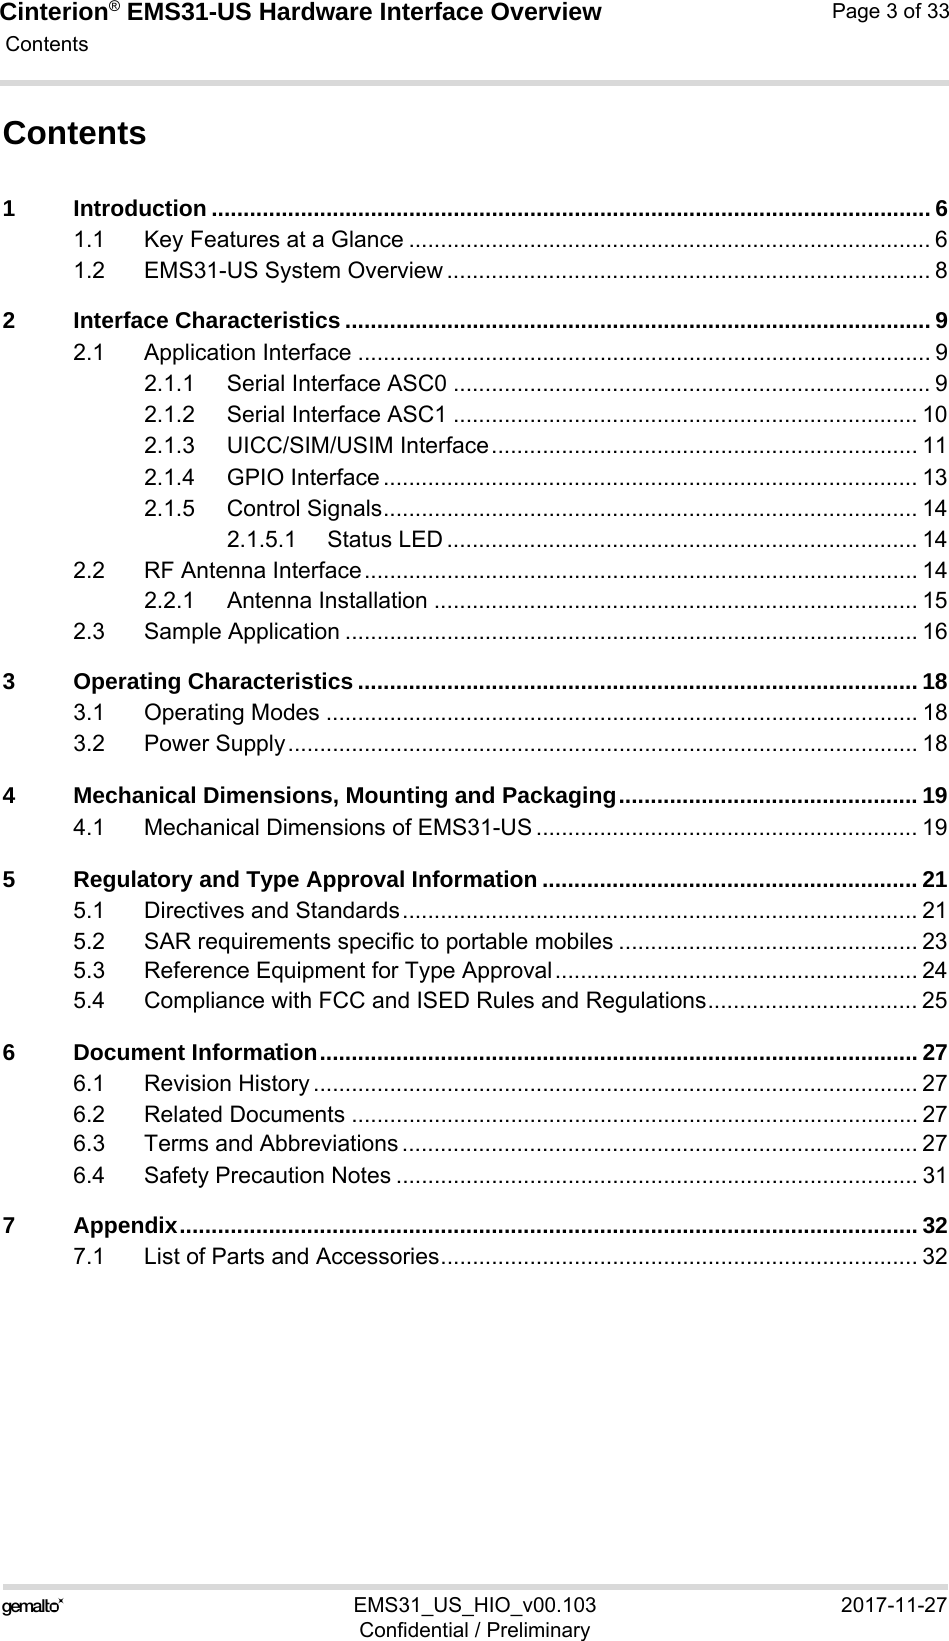 Cinterion® EMS31-US Hardware Interface Overview Contents33EMS31_US_HIO_v00.103 2017-11-27Confidential / PreliminaryPage 3 of 33Contents1 Introduction ................................................................................................................. 61.1 Key Features at a Glance .................................................................................. 61.2 EMS31-US System Overview ............................................................................ 82 Interface Characteristics ............................................................................................ 92.1 Application Interface .......................................................................................... 92.1.1 Serial Interface ASC0 ........................................................................... 92.1.2 Serial Interface ASC1 ......................................................................... 102.1.3 UICC/SIM/USIM Interface................................................................... 112.1.4 GPIO Interface .................................................................................... 132.1.5 Control Signals.................................................................................... 142.1.5.1 Status LED .......................................................................... 142.2 RF Antenna Interface....................................................................................... 142.2.1 Antenna Installation ............................................................................ 152.3 Sample Application .......................................................................................... 163 Operating Characteristics ........................................................................................ 183.1 Operating Modes ............................................................................................. 183.2 Power Supply................................................................................................... 184 Mechanical Dimensions, Mounting and Packaging............................................... 194.1 Mechanical Dimensions of EMS31-US ............................................................ 195 Regulatory and Type Approval Information ........................................................... 215.1 Directives and Standards................................................................................. 215.2 SAR requirements specific to portable mobiles ............................................... 235.3 Reference Equipment for Type Approval......................................................... 245.4 Compliance with FCC and ISED Rules and Regulations................................. 256 Document Information.............................................................................................. 276.1 Revision History ............................................................................................... 276.2 Related Documents ......................................................................................... 276.3 Terms and Abbreviations ................................................................................. 276.4 Safety Precaution Notes .................................................................................. 317 Appendix.................................................................................................................... 327.1 List of Parts and Accessories........................................................................... 32